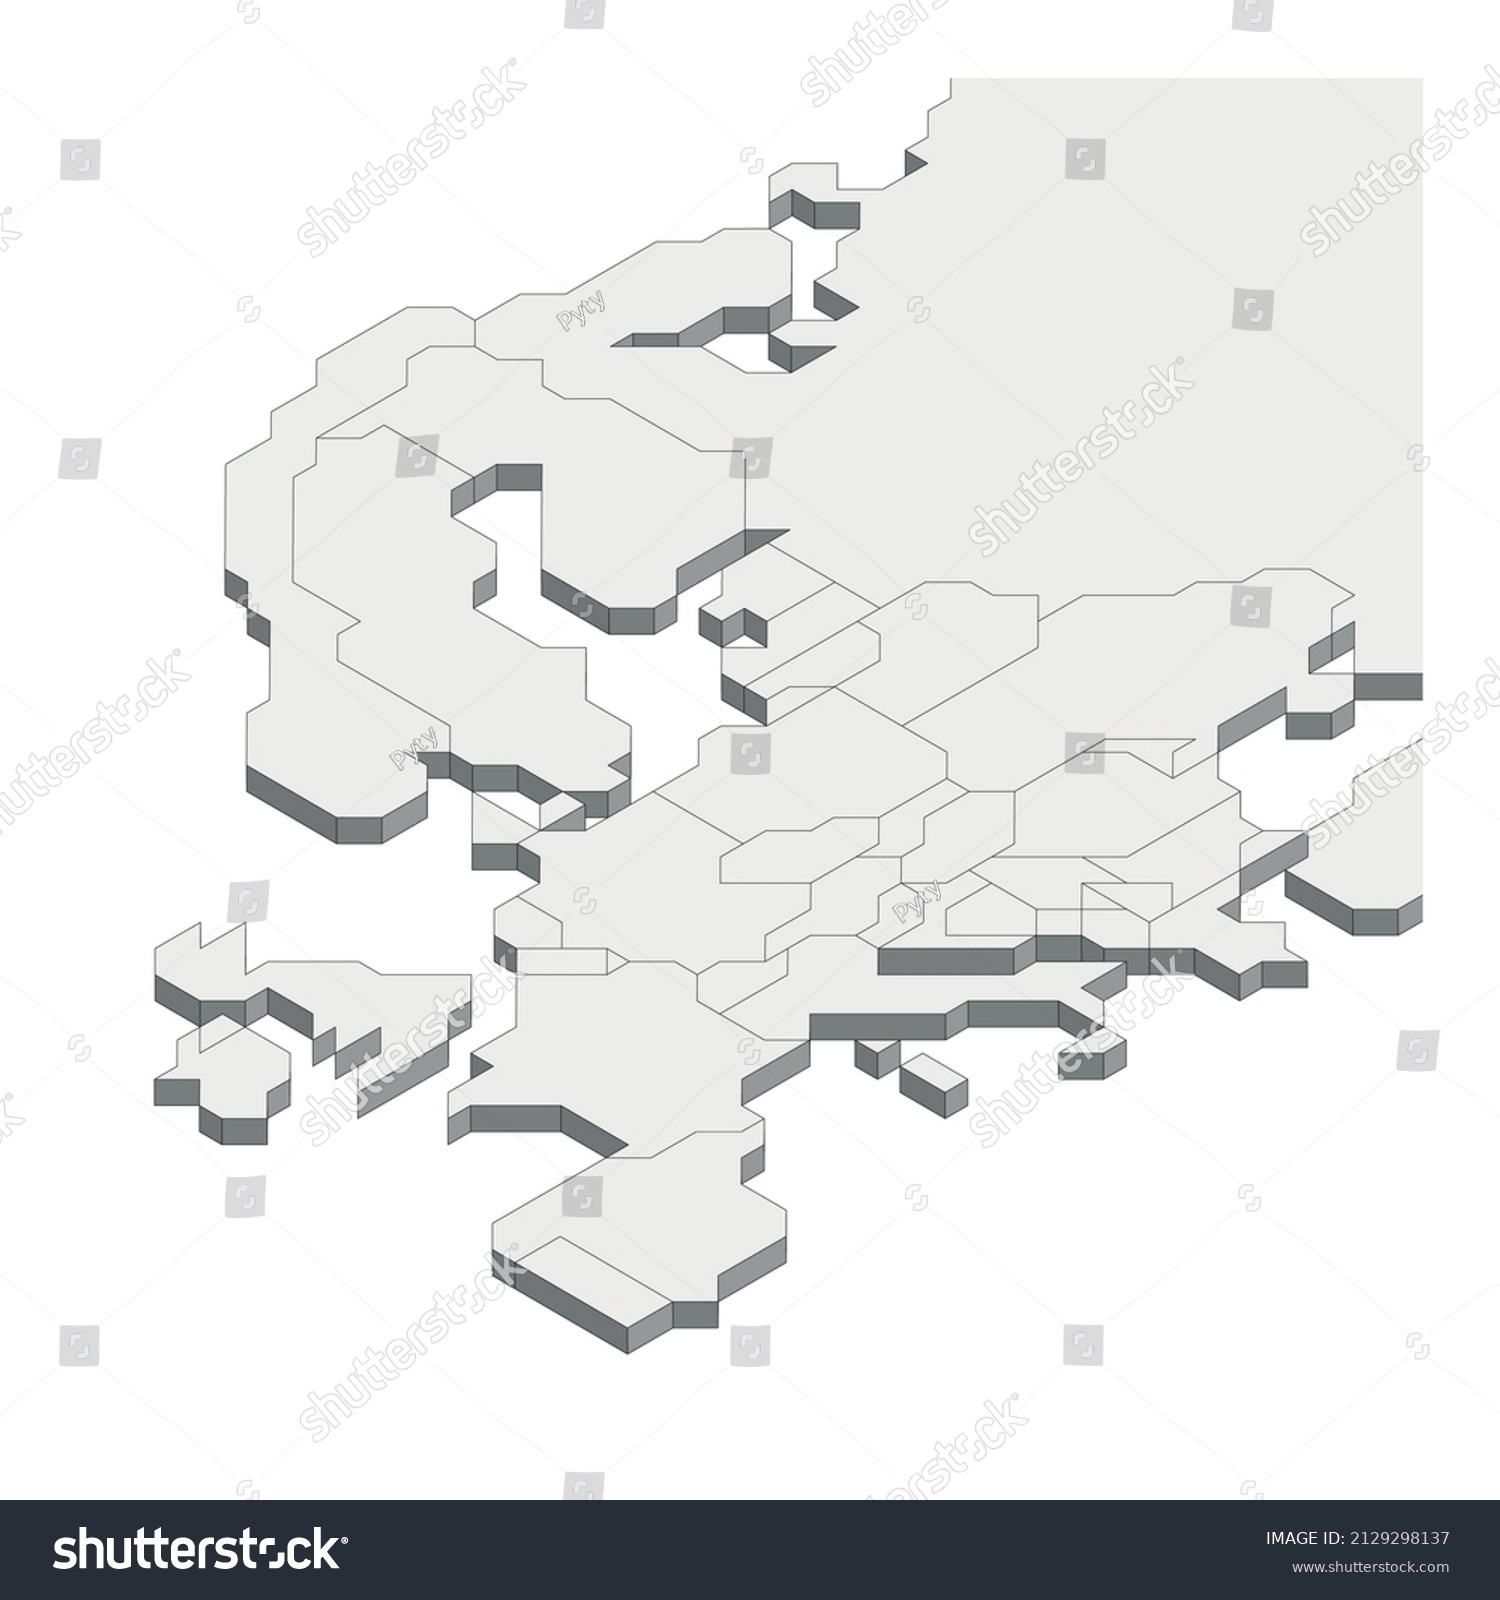 Isometric Political Map Europe Stock Vector Royalty Free 2129298137 Shutterstock 6819